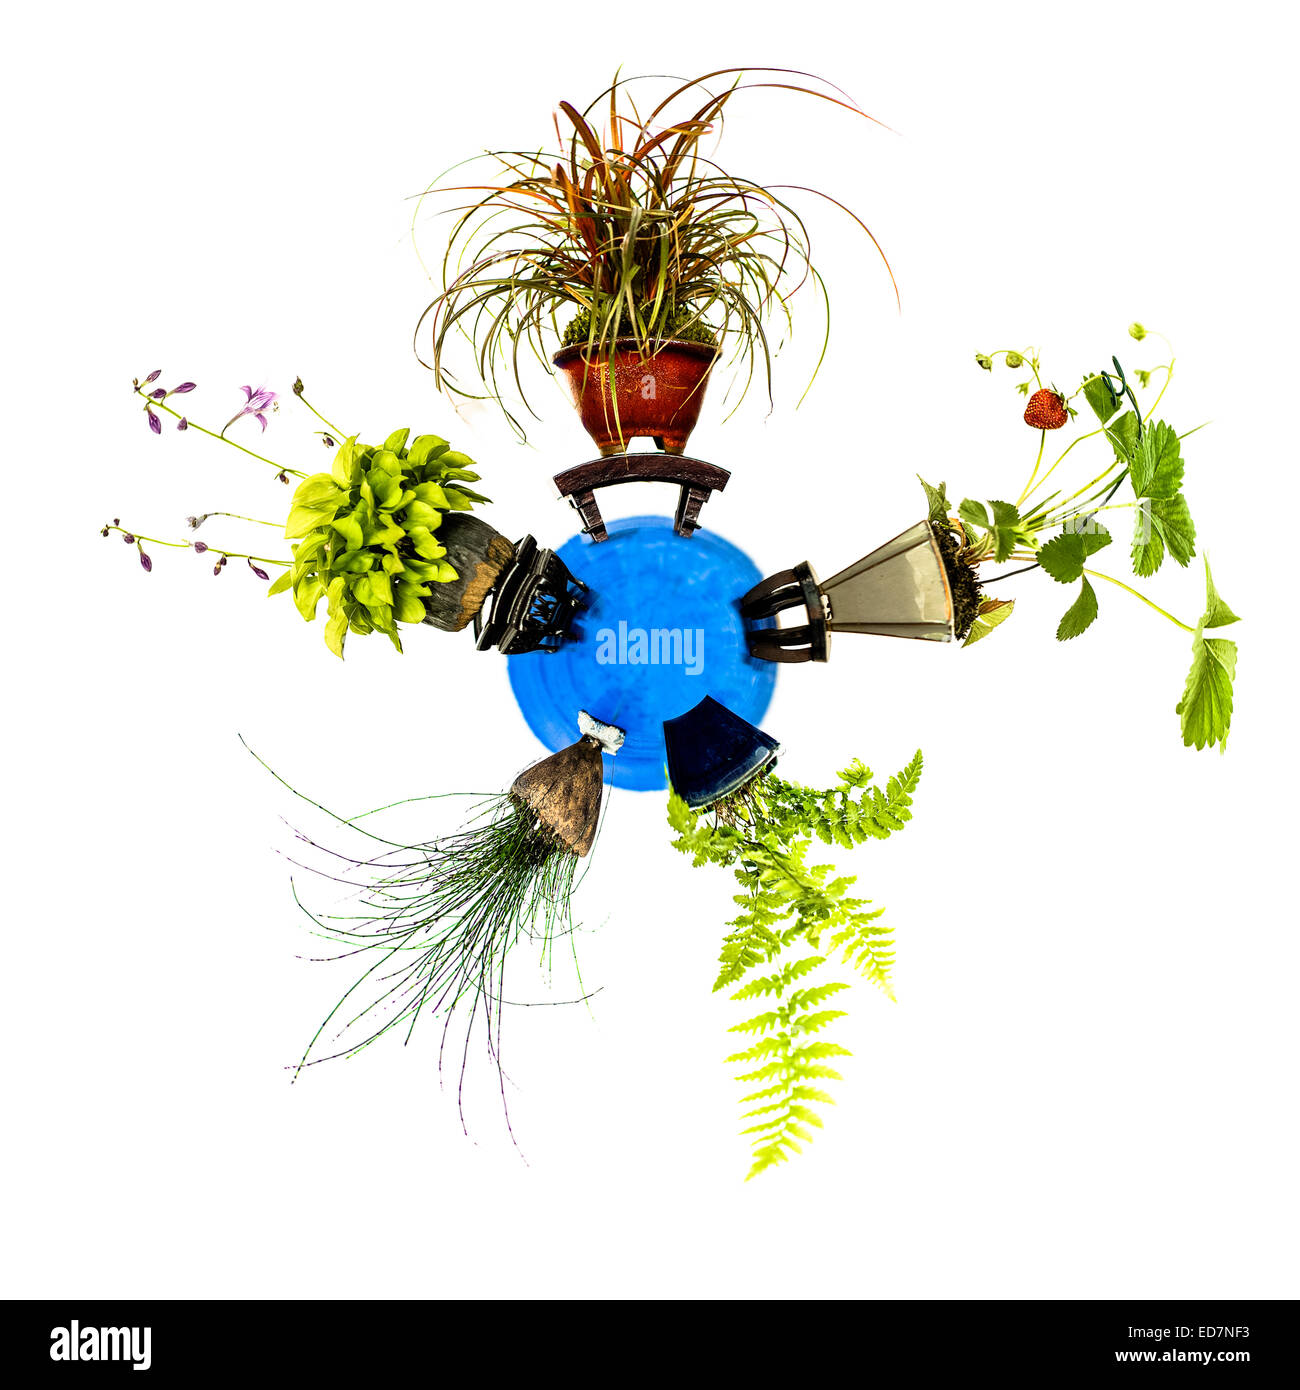 Mini planet with five different plants like grass, fern and strawberry Stock Photo